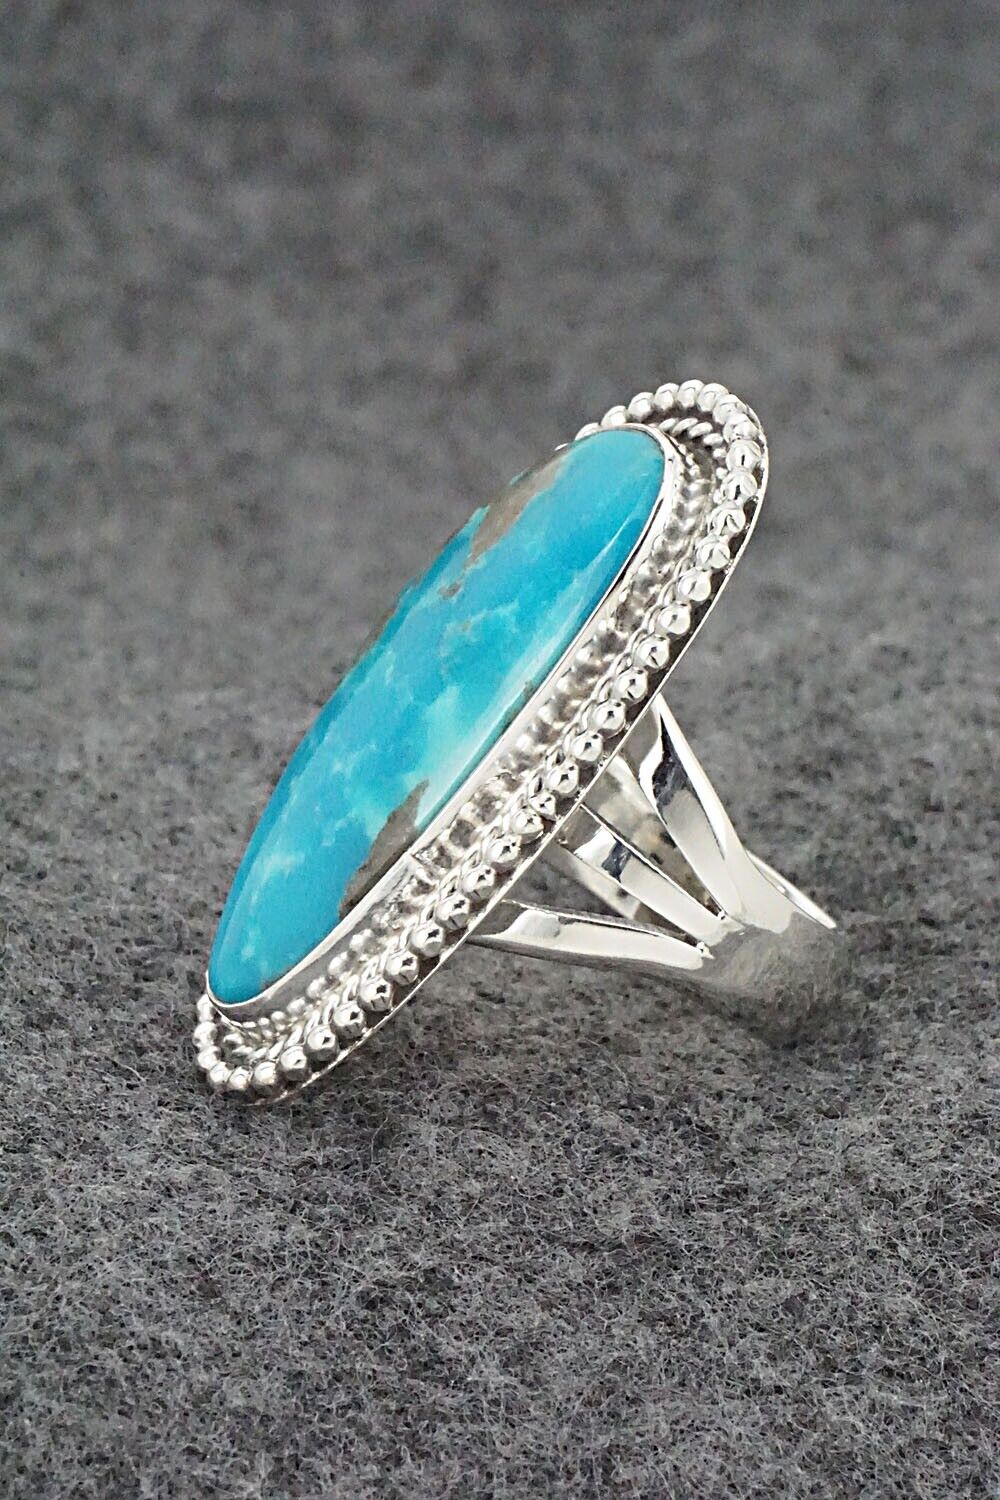 Turquoise & Sterling Silver Ring - Andrew Vandever - Size 8.75